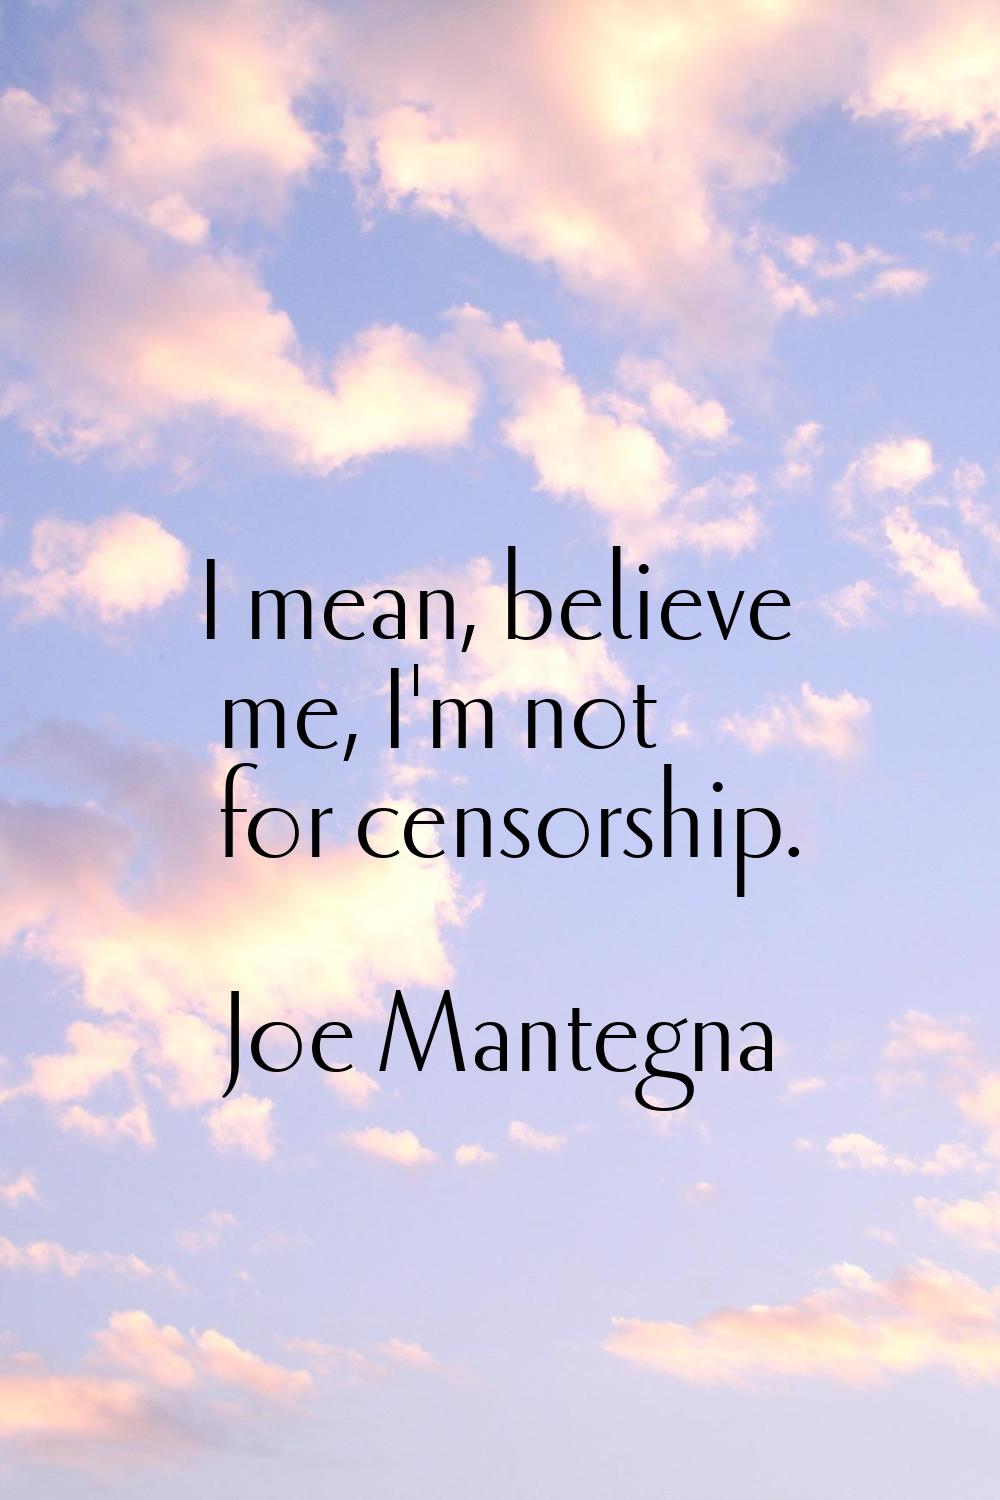 I mean, believe me, I'm not for censorship.